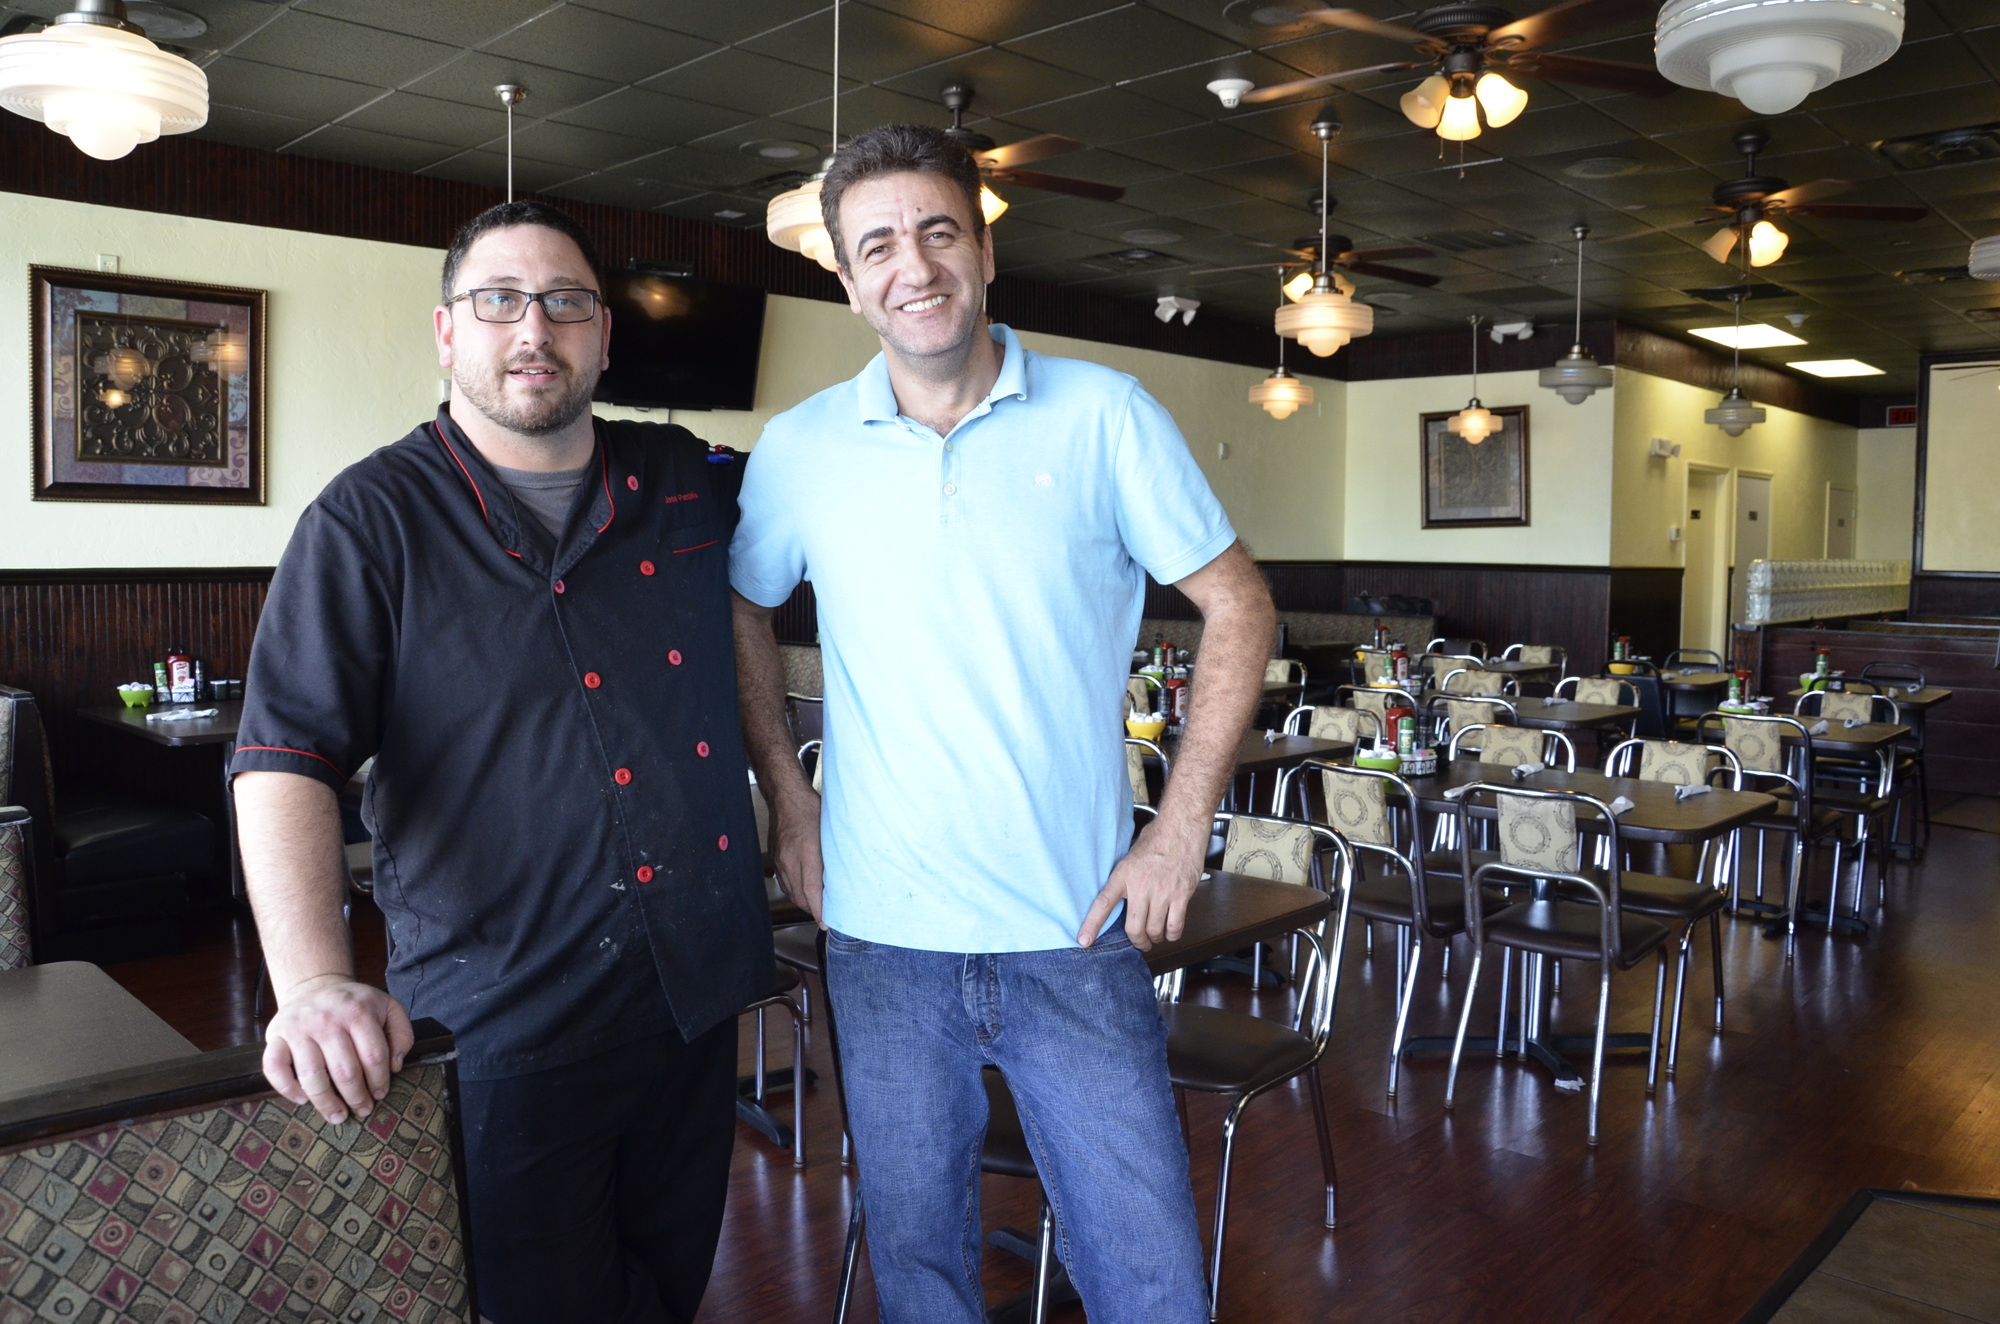 Jason Pantelis and Mike Nicovic, both of Cape Coral, decided to open a restaurant together. Leon's opened Monday.